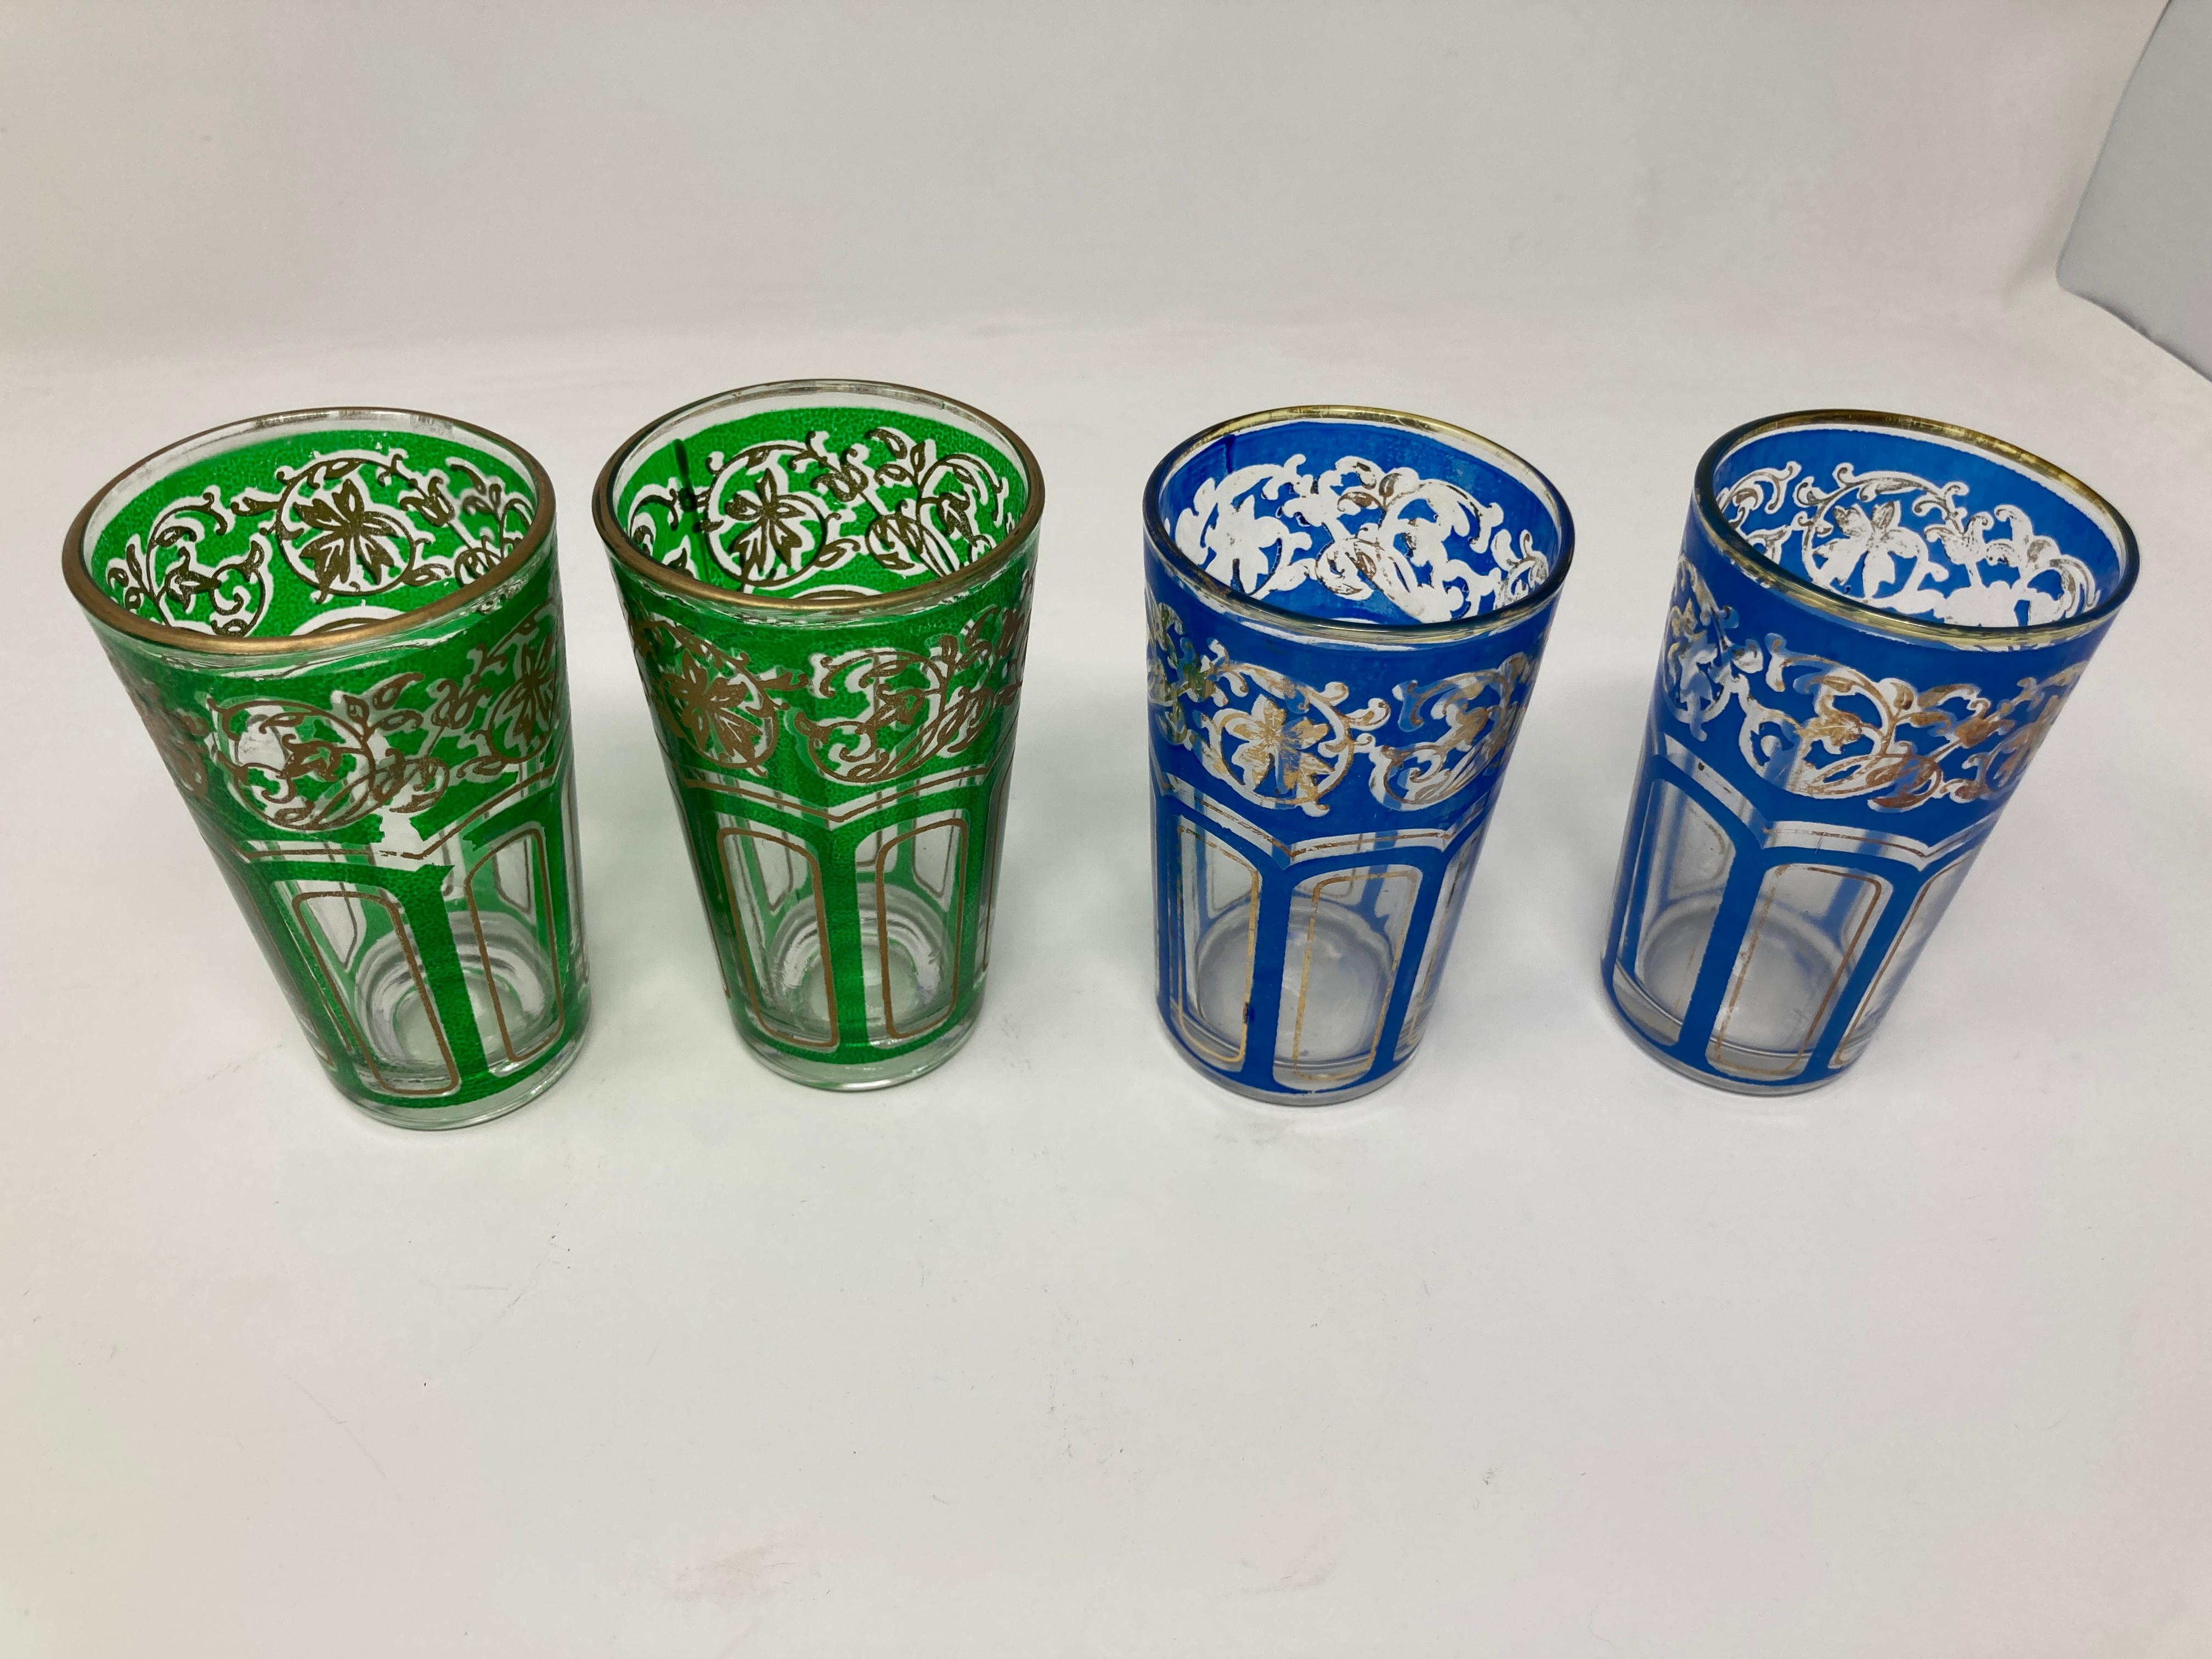 Set of four vintage Moroccan colored glasses with gold raised Moorish design. 
Decorated with a classical gold and pattern Moorish frieze. 
Use these elegant vintage shot glasses for Moroccan tea, or any hot or cold drink. 
Perfect for the holidays